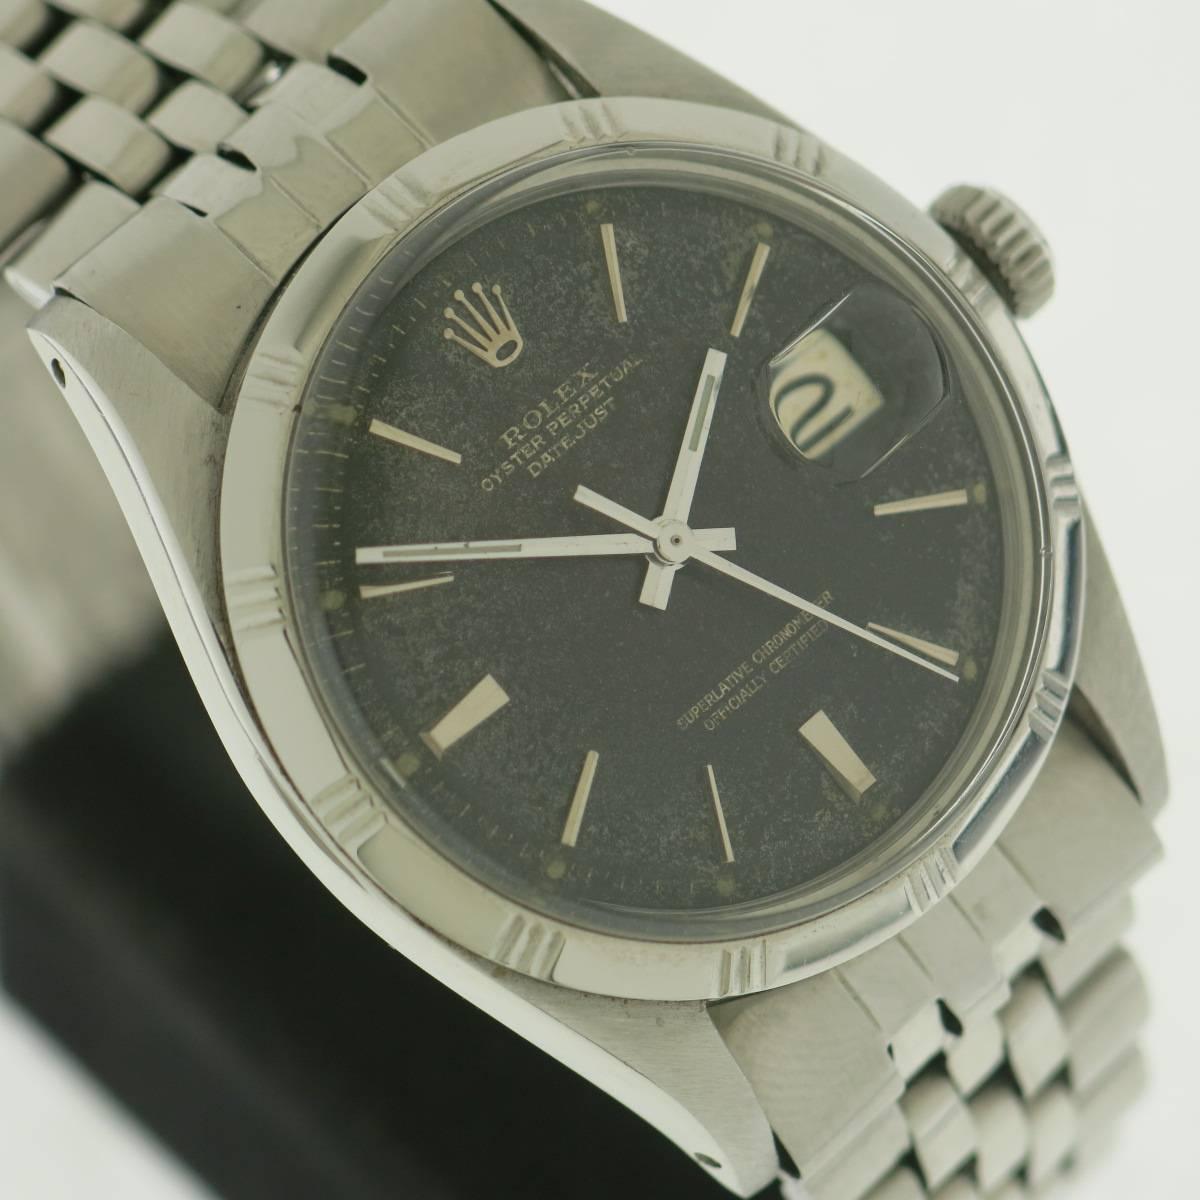 Rolex Stainless Steel Oyster Perpetual Datejust Wristwatch Ref 1603 In Good Condition For Sale In Milano, IT